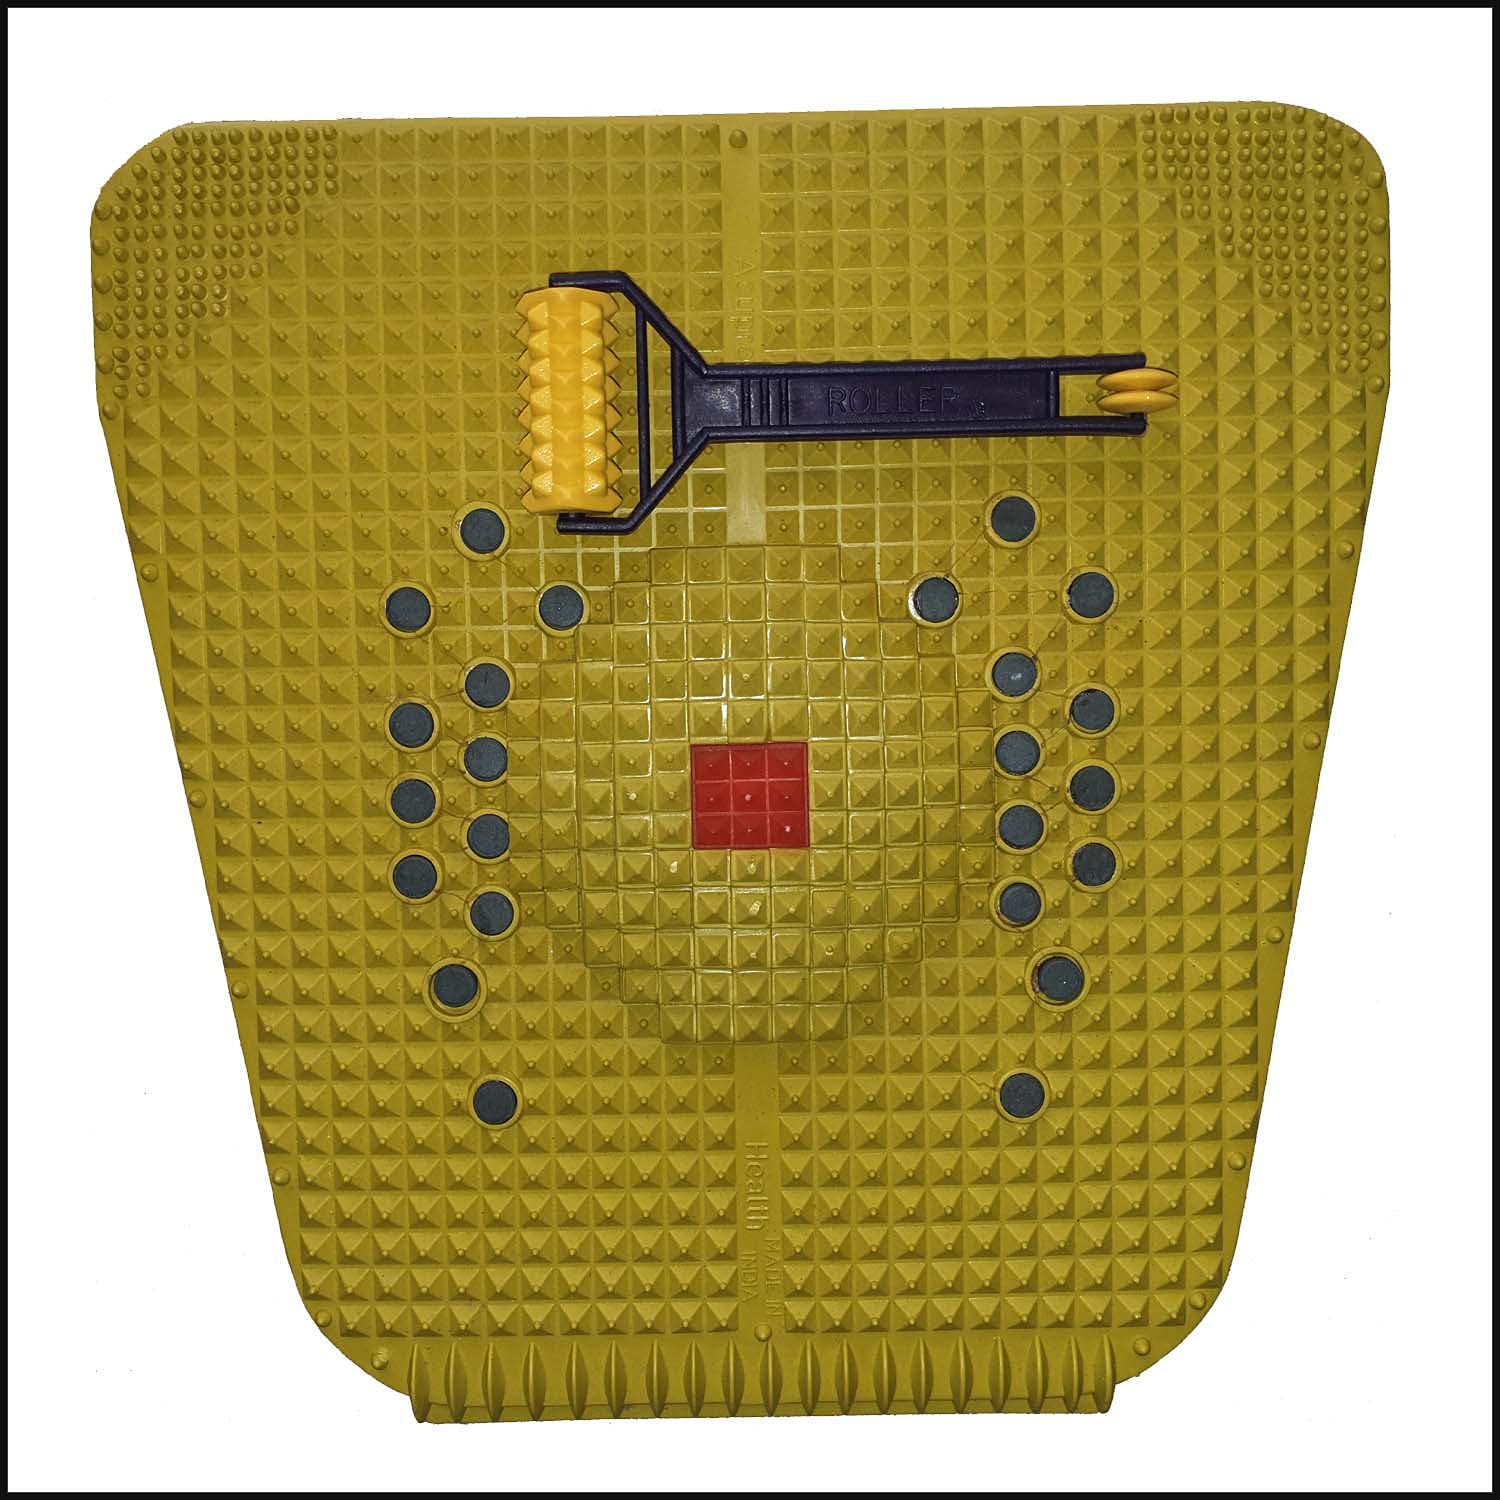 Acupressure Natural Care System Acupressure Mat 2000, Foot Pain Remove & Roller